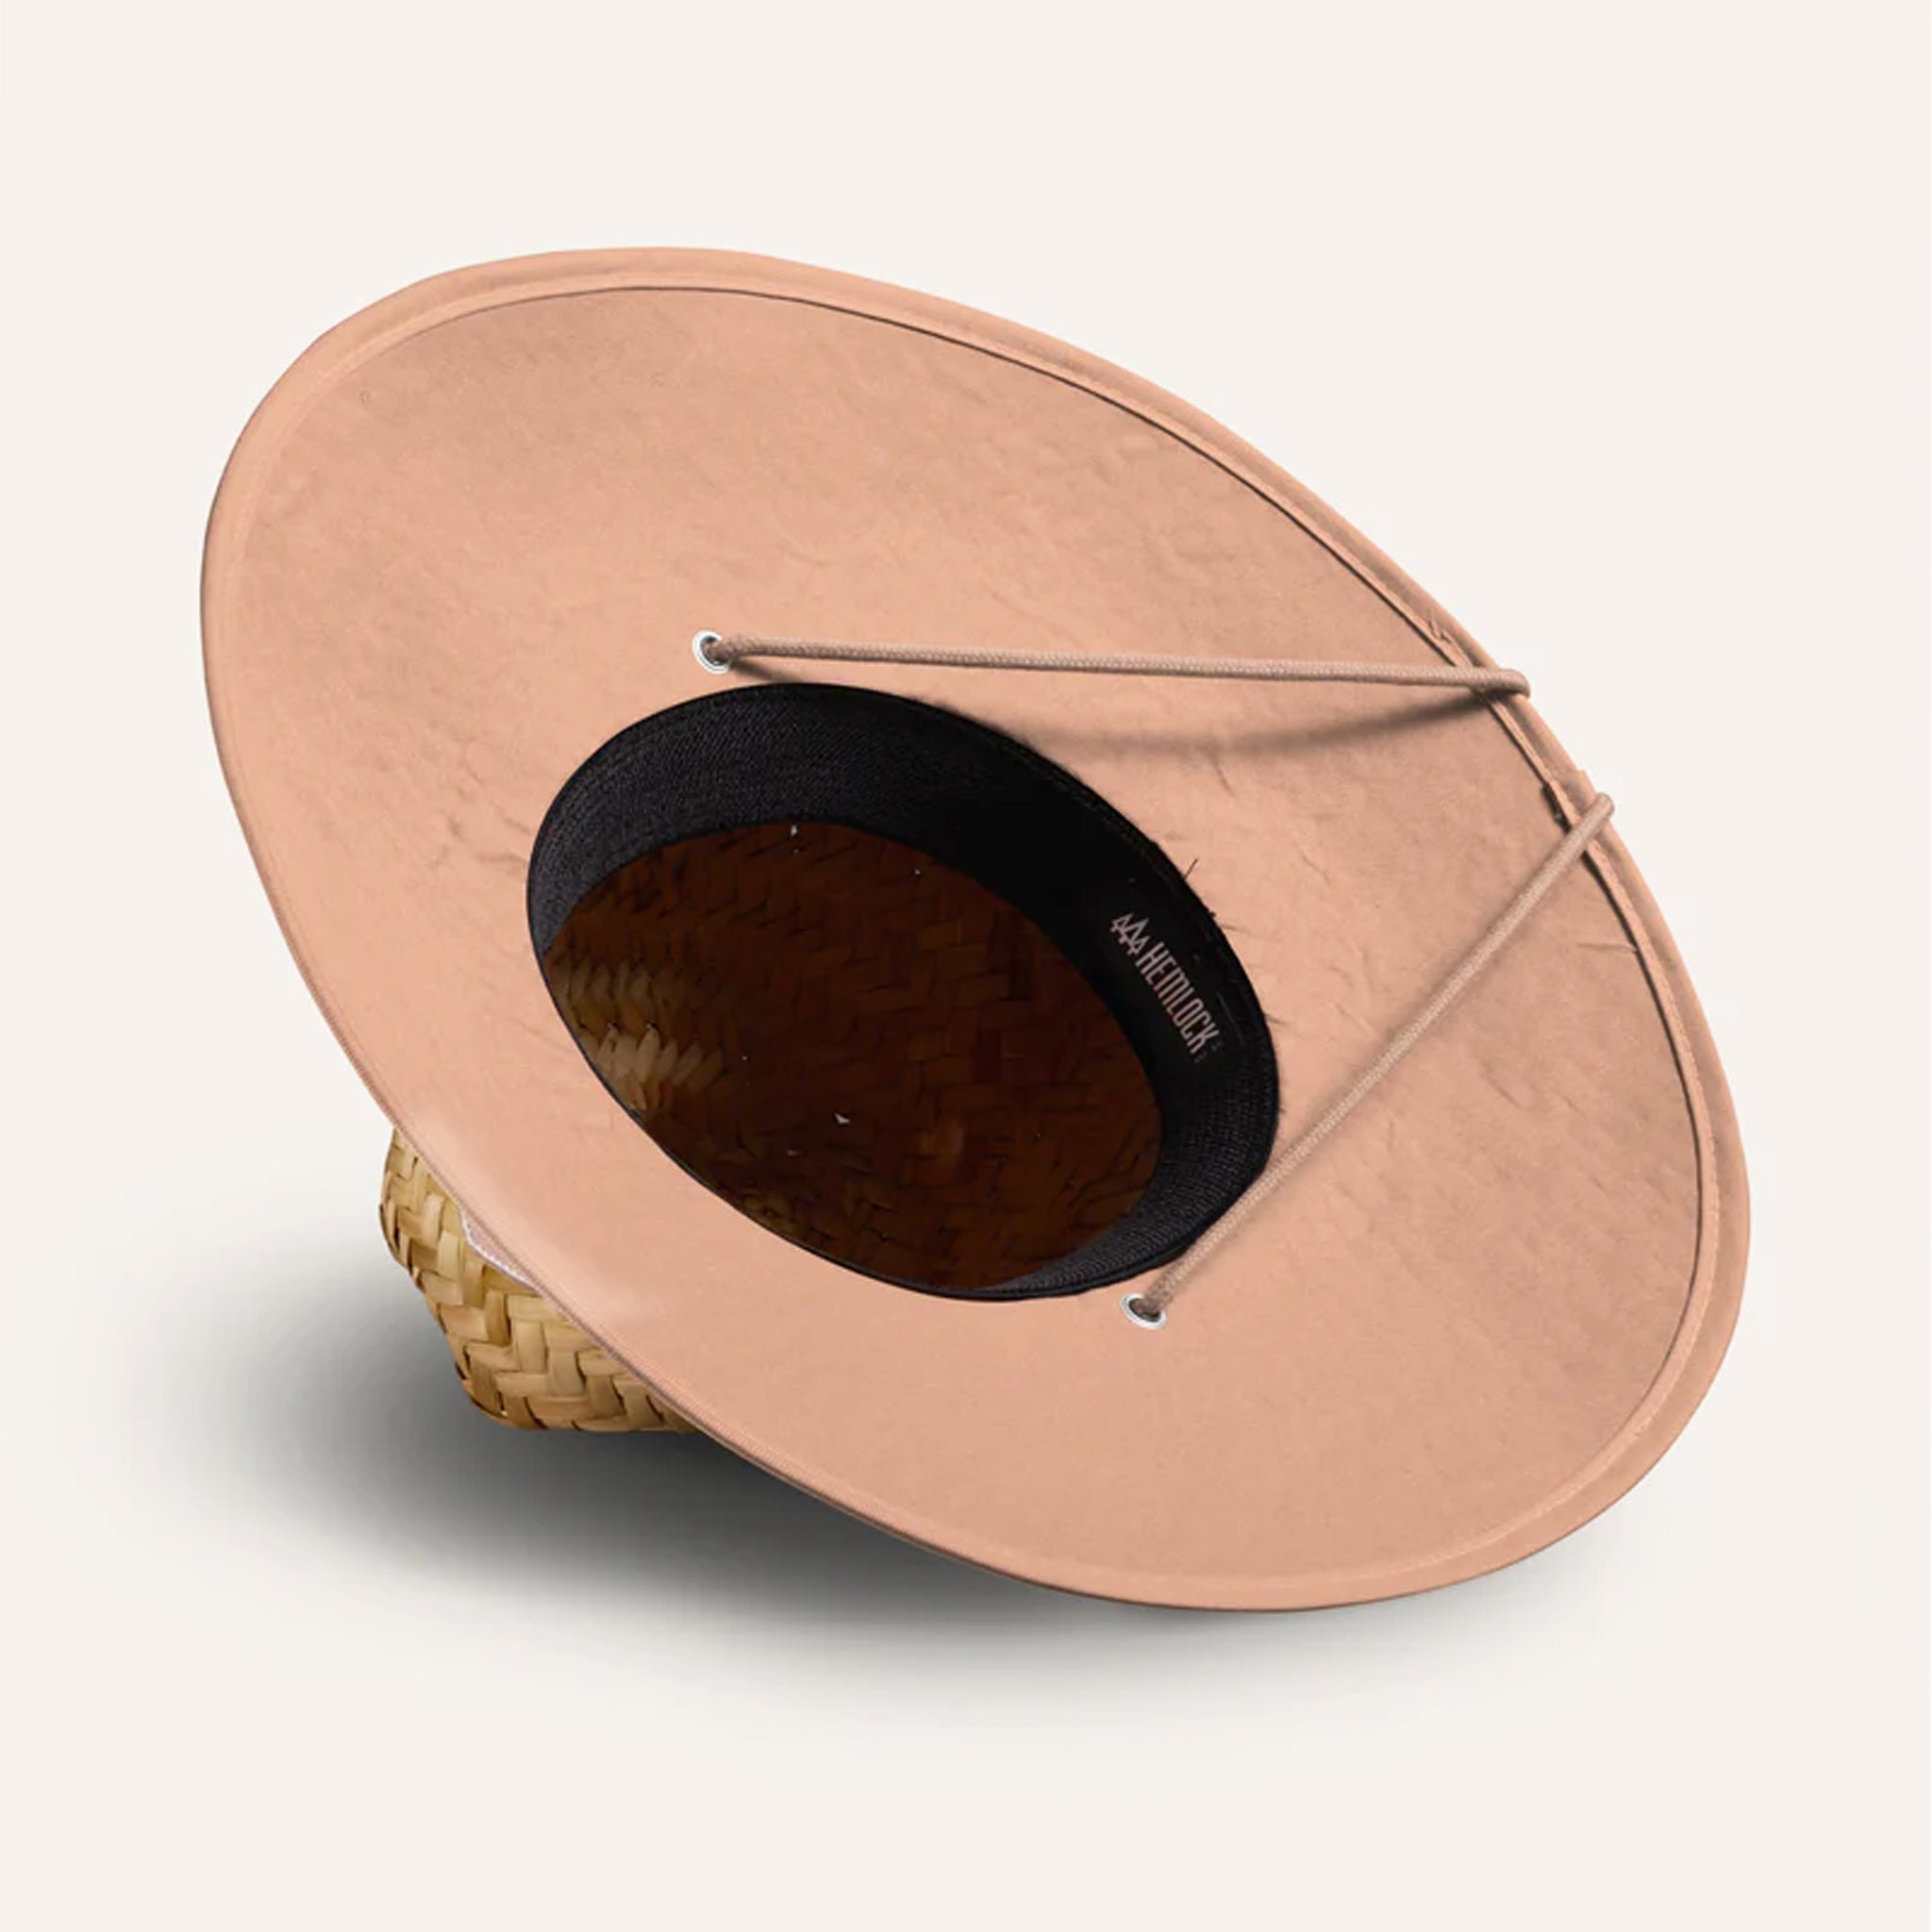 On a white background is a straw hat with a neutral mauve / tan brim underneath and neck strap. 